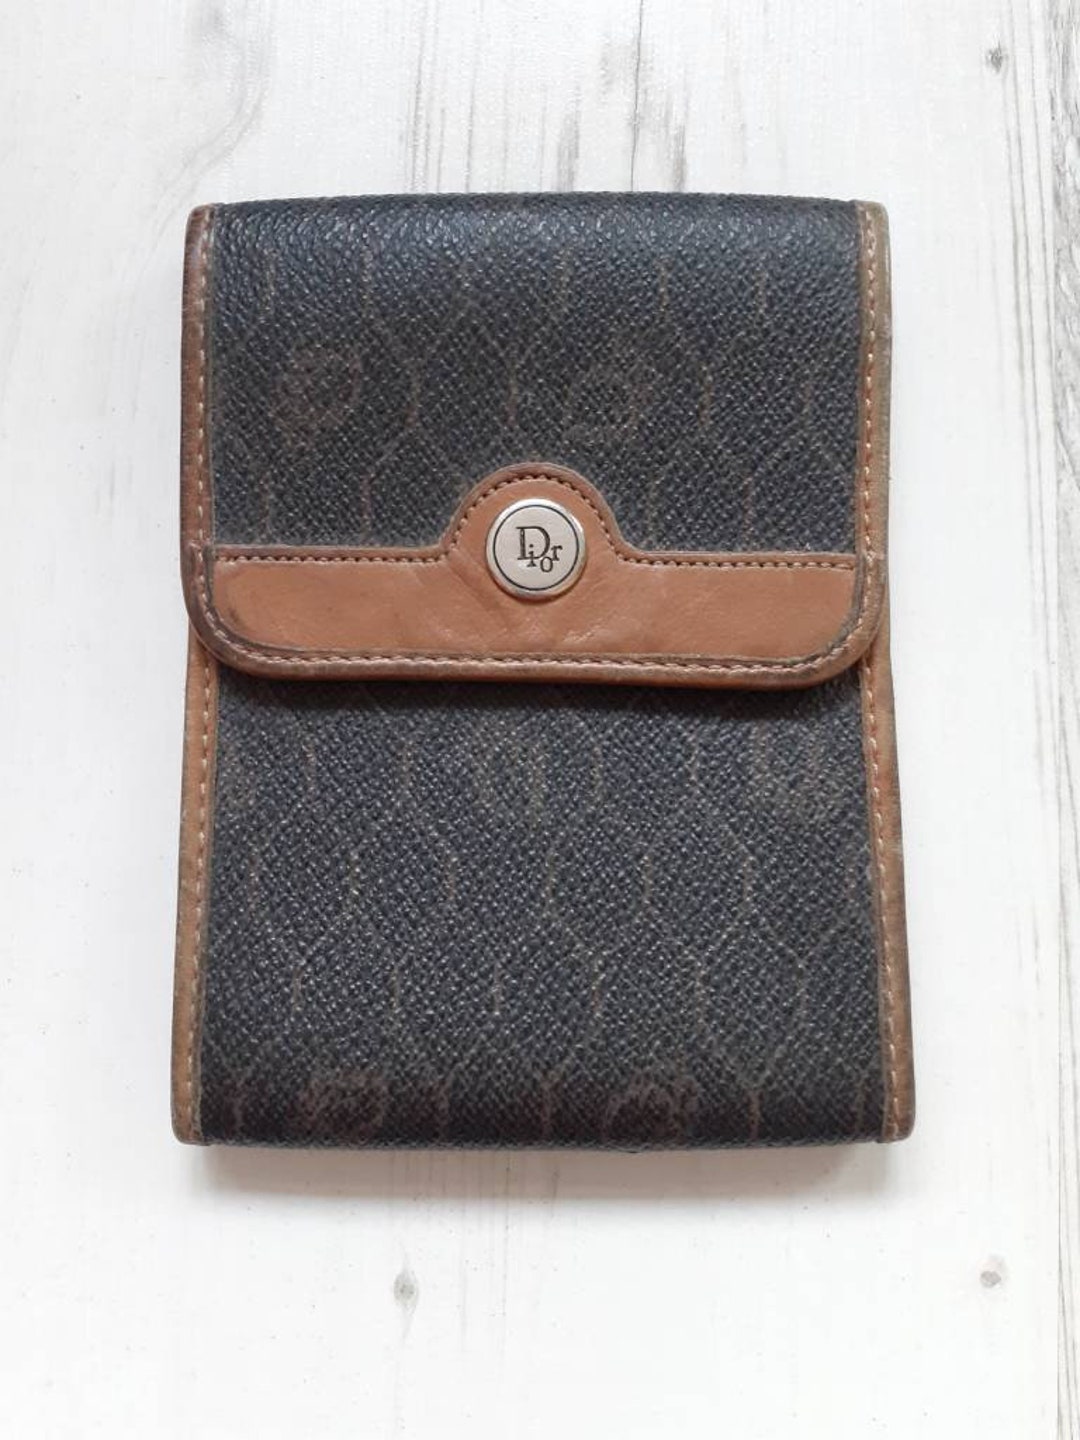 Christian Dior Classic Monogram Leather Vintage Card Case Holder Pouch ...